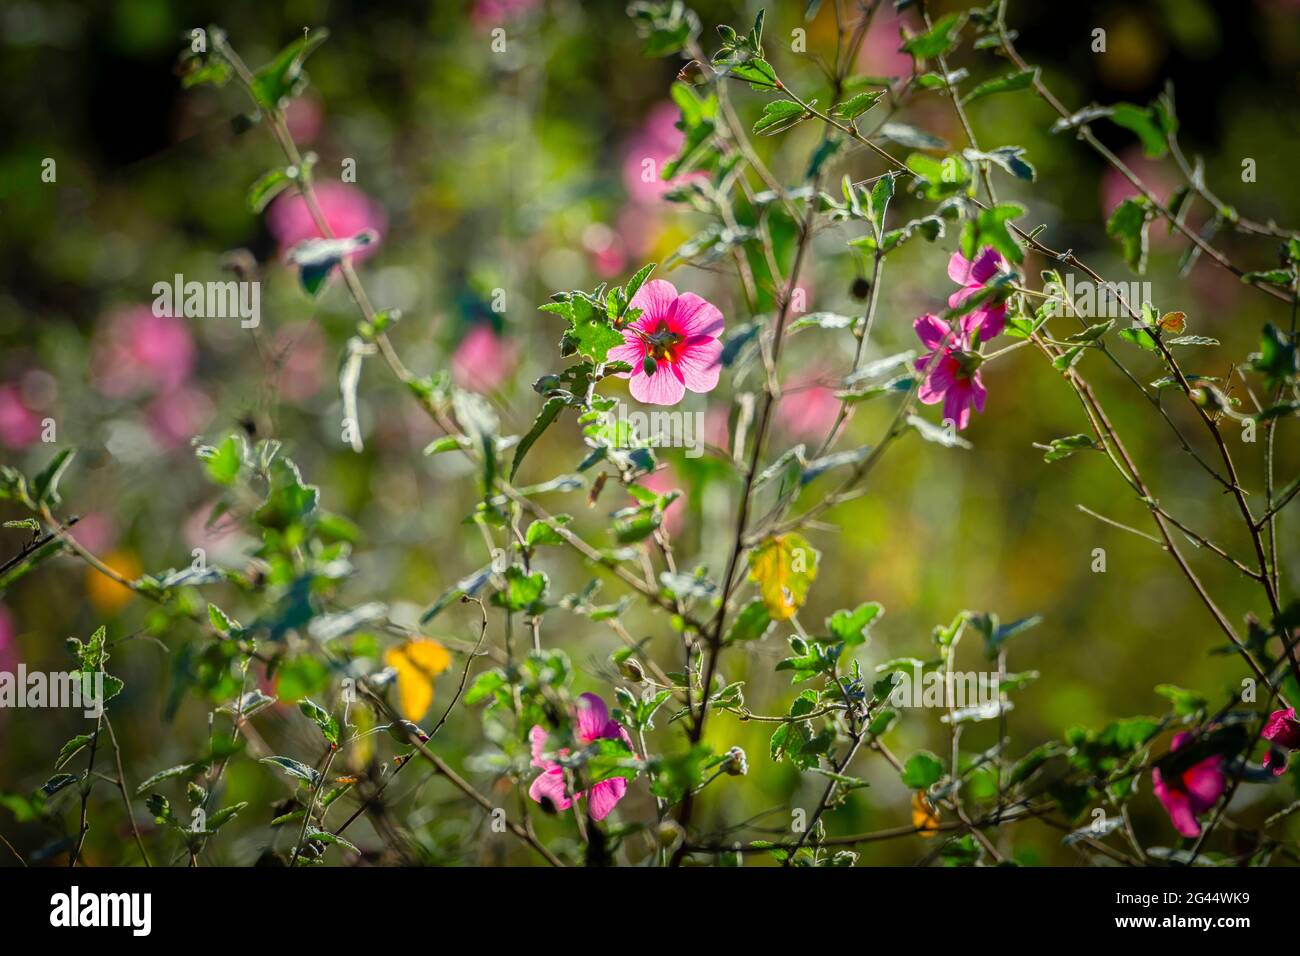 Close-up of pink flowers on plant Stock Photo